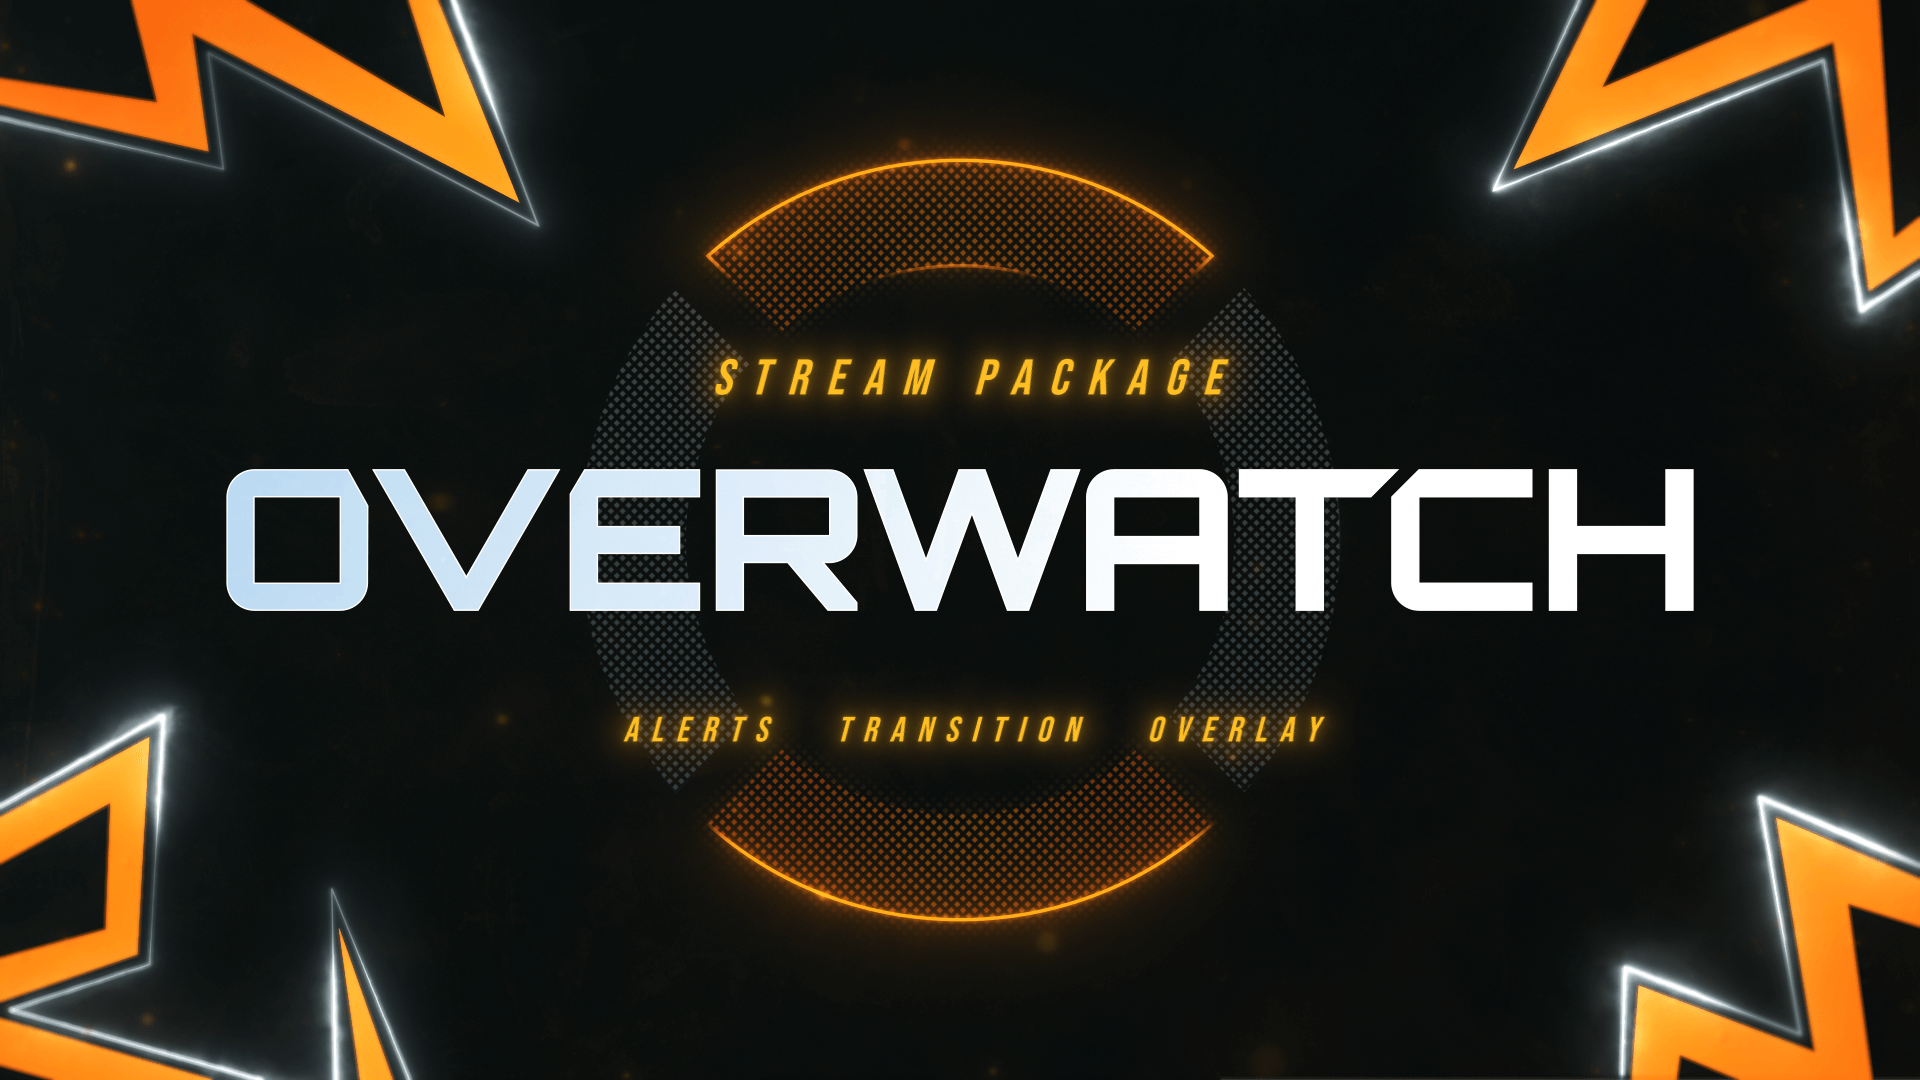 Overwatch Stream Overlay & Alerts Package for Twitch and Youtube